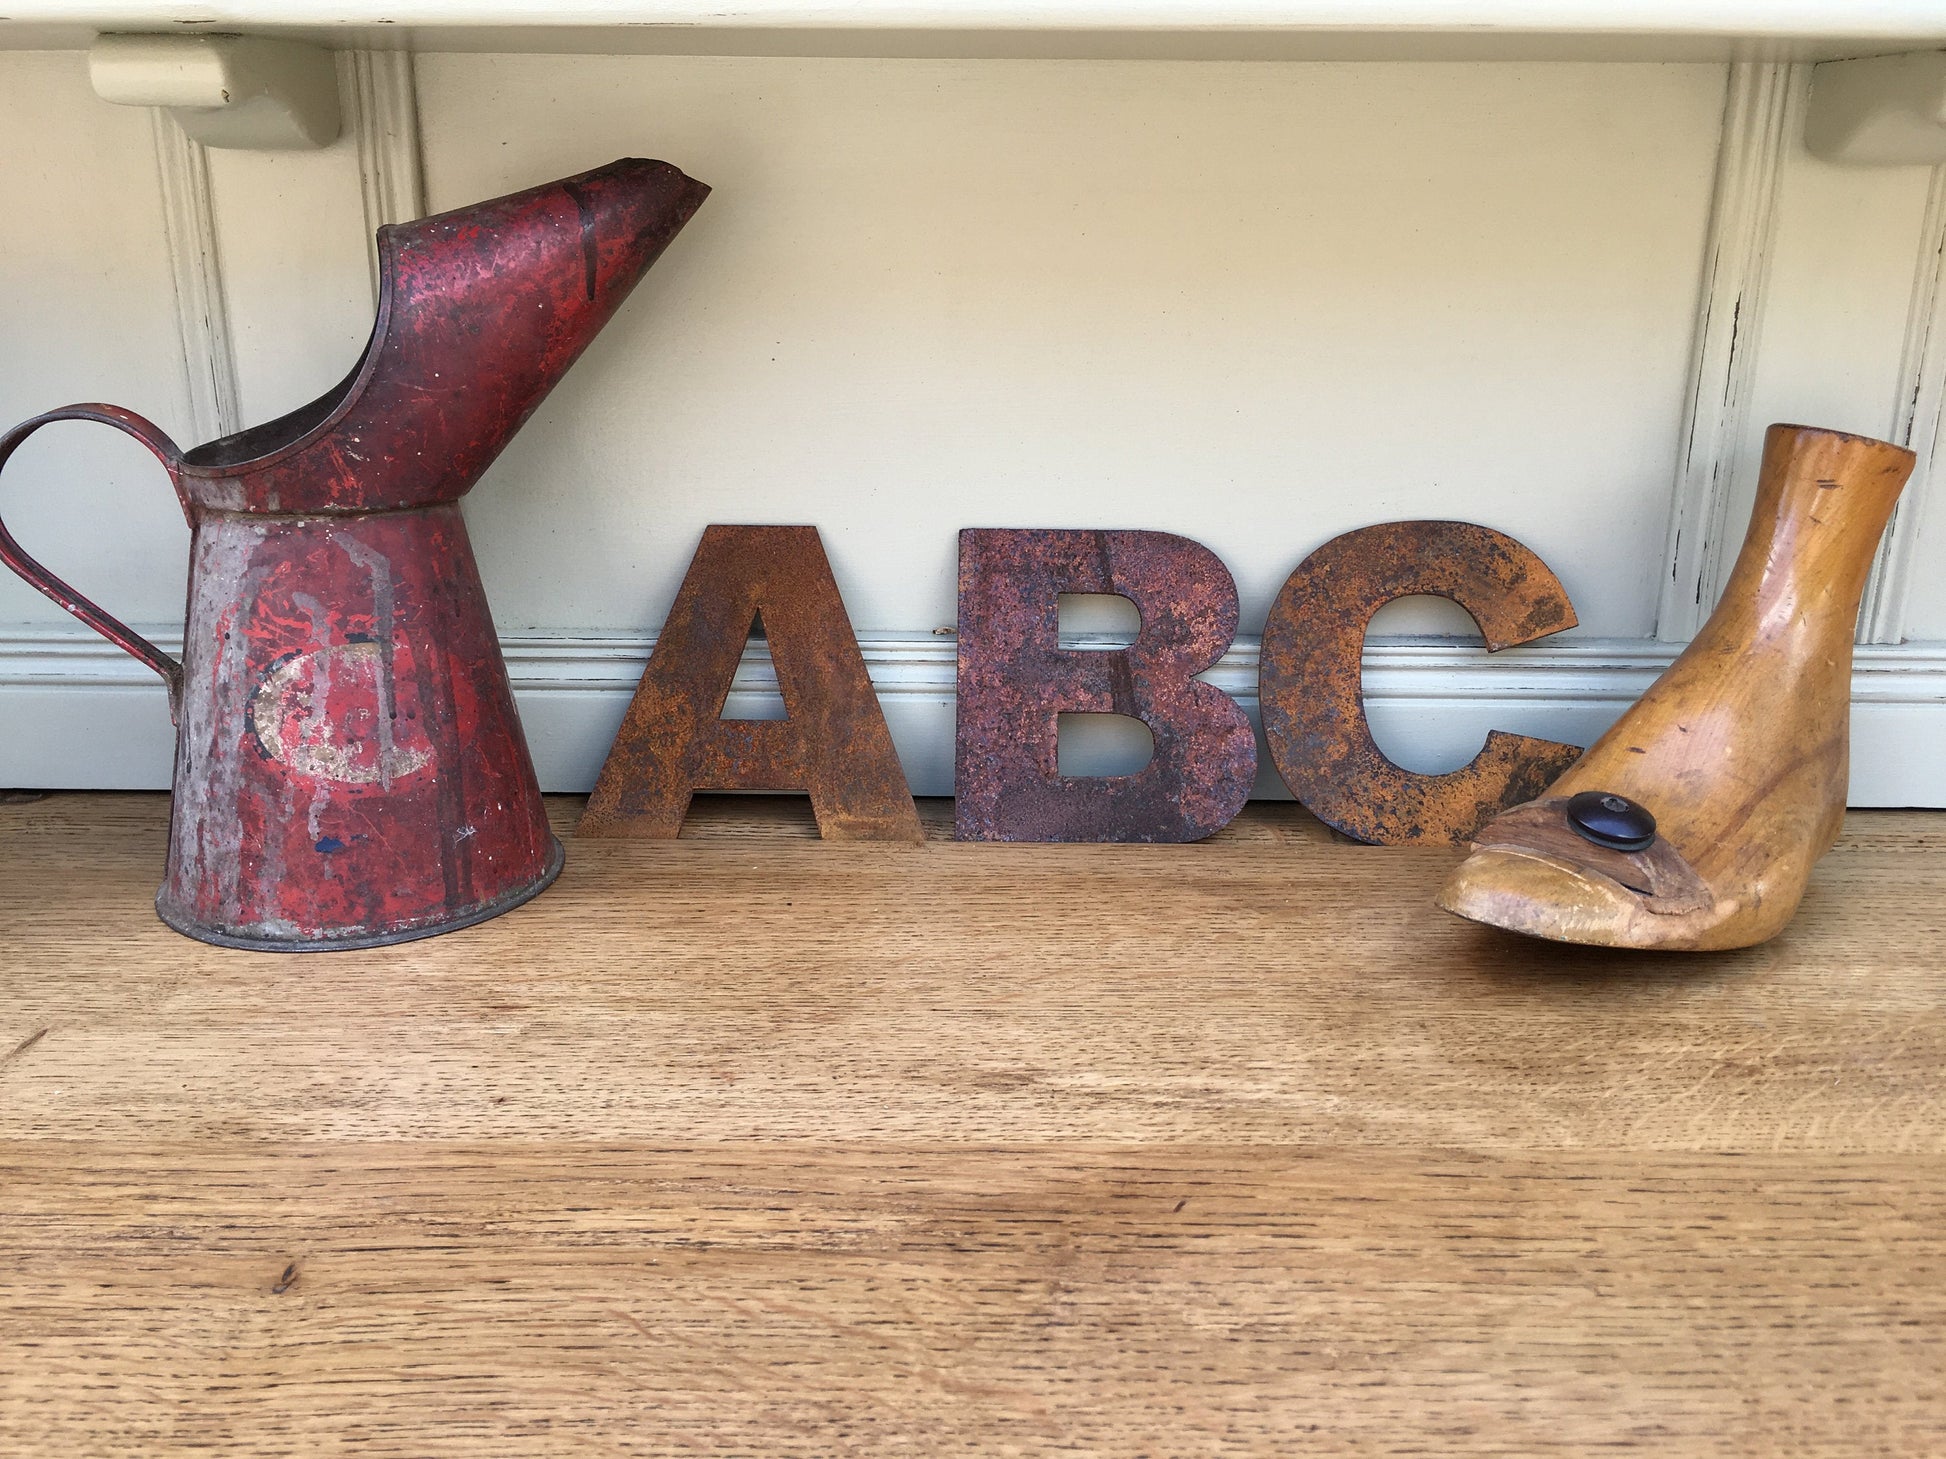 5" fat rusty lettering spelling out ABC